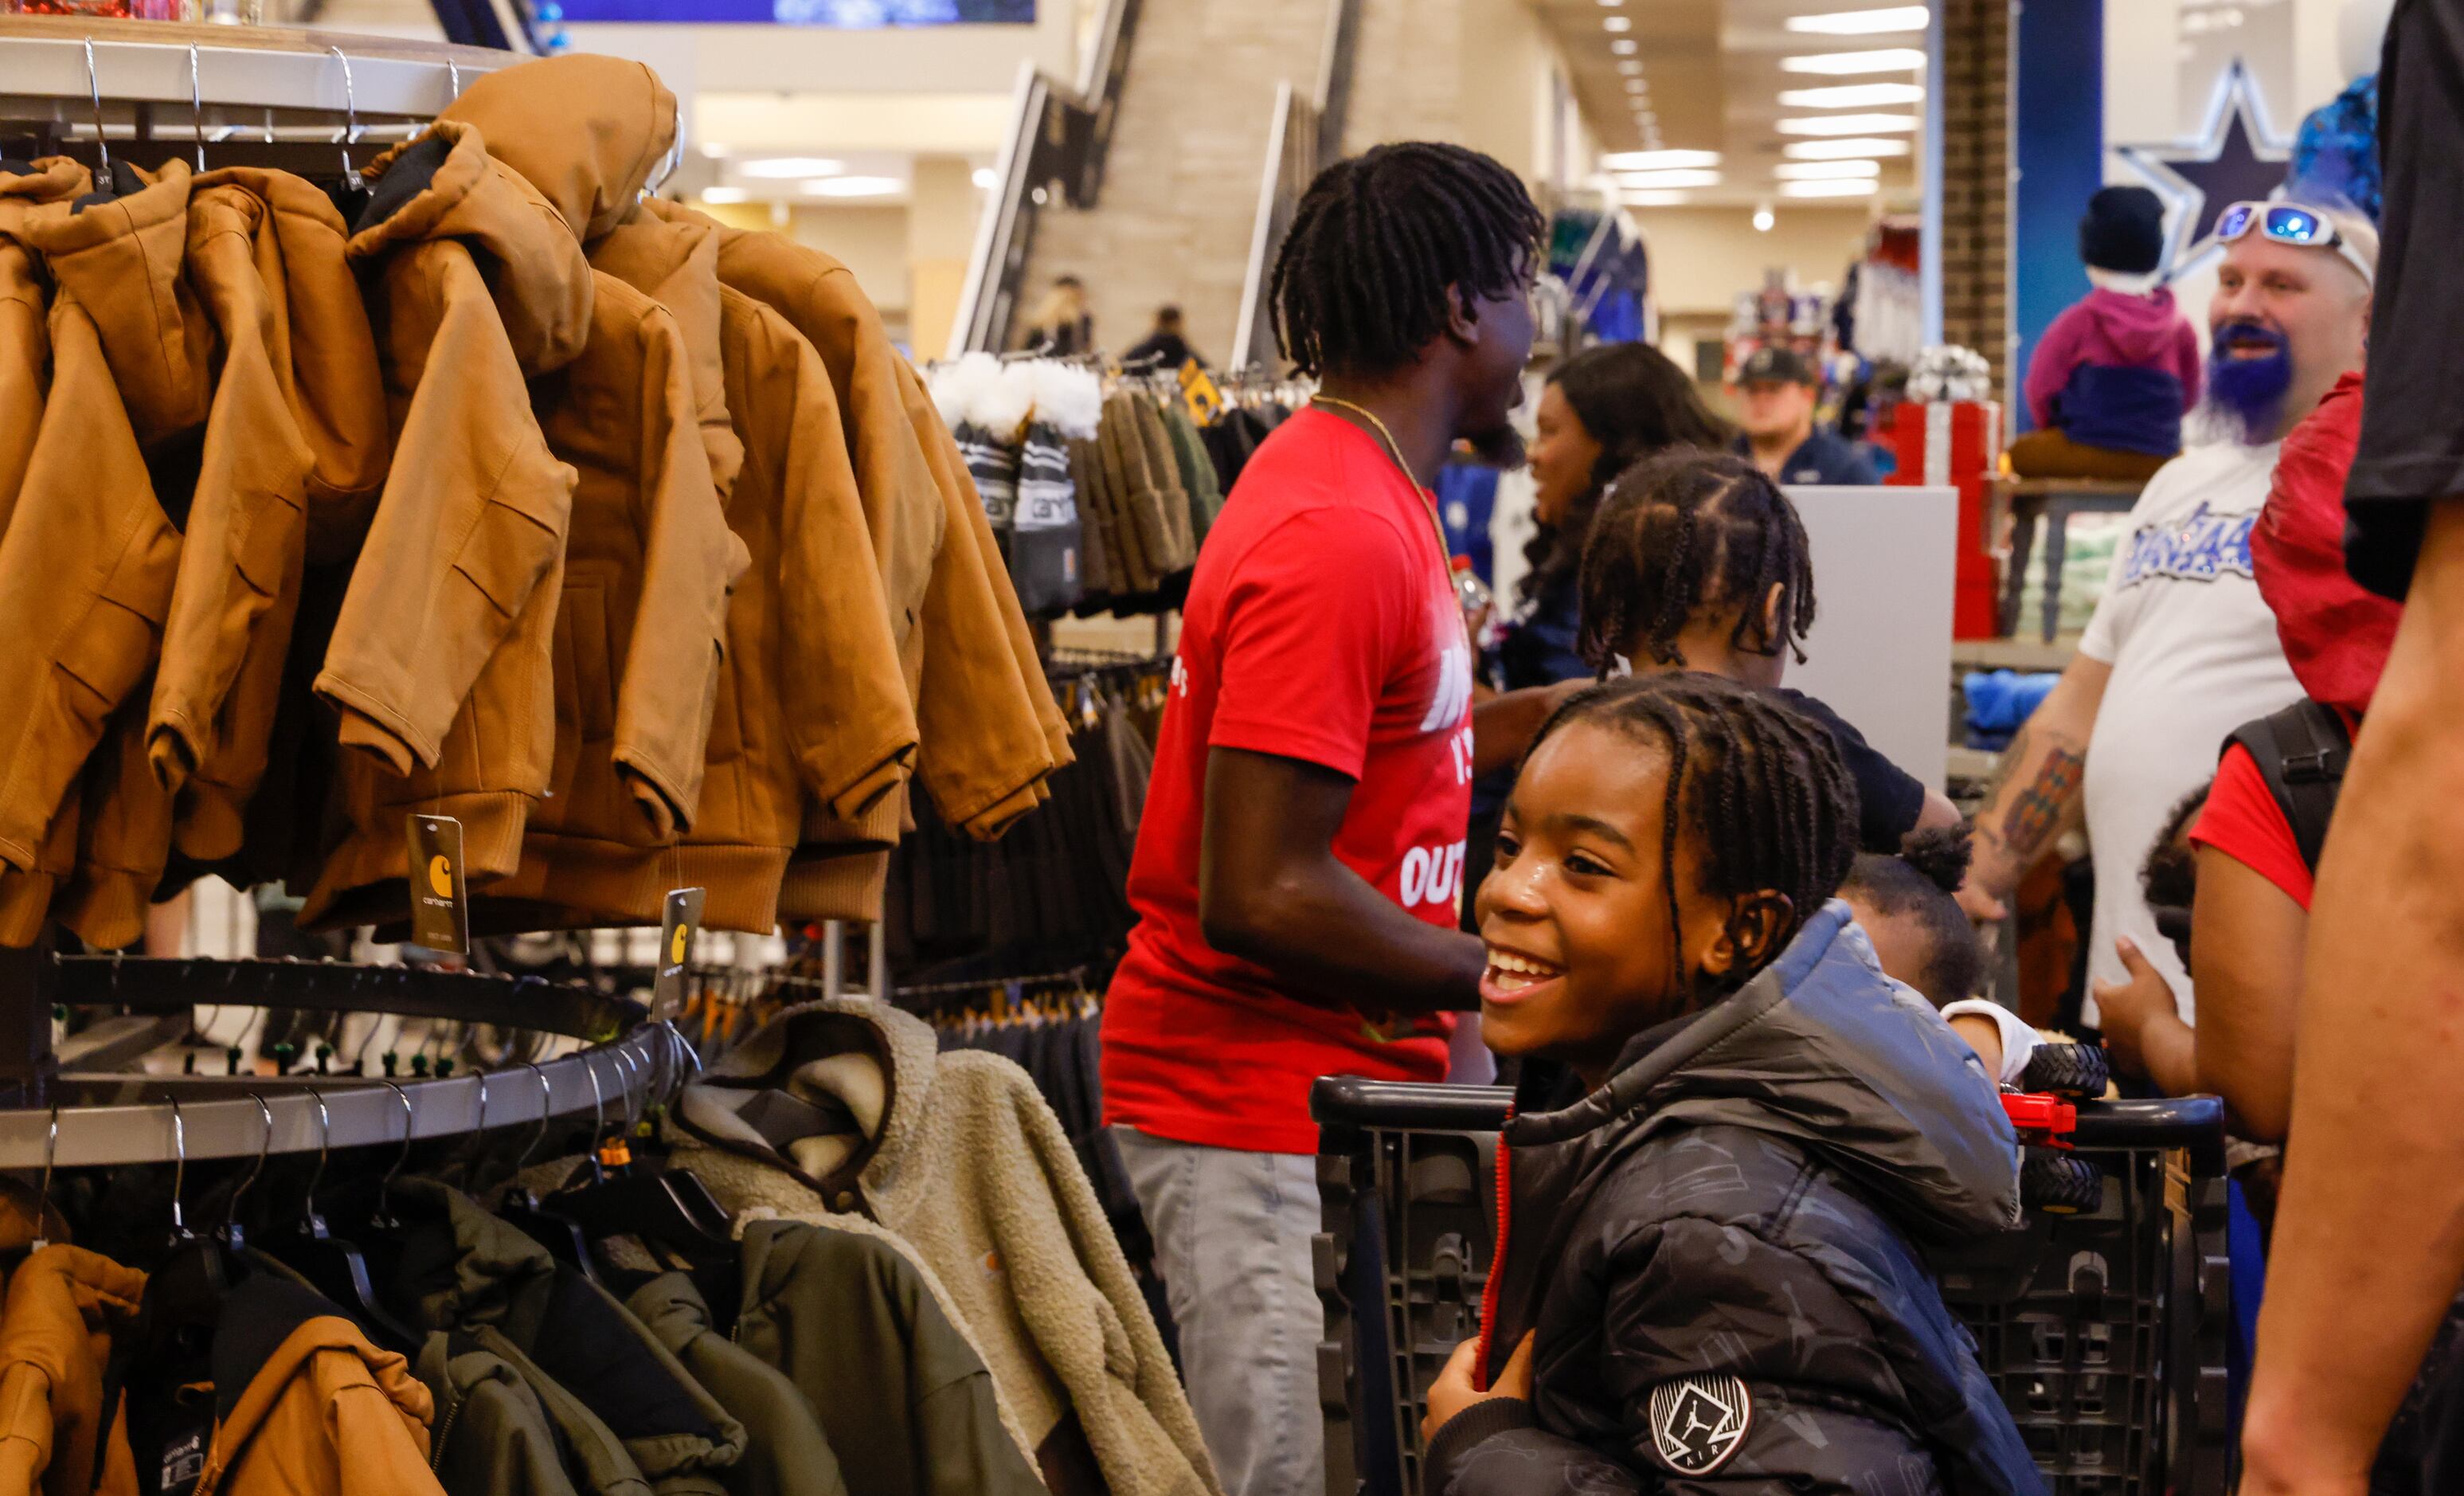 Derrick Givens, Jr., 9, smiles while pulling on a new Jordan jacket while shopping with...